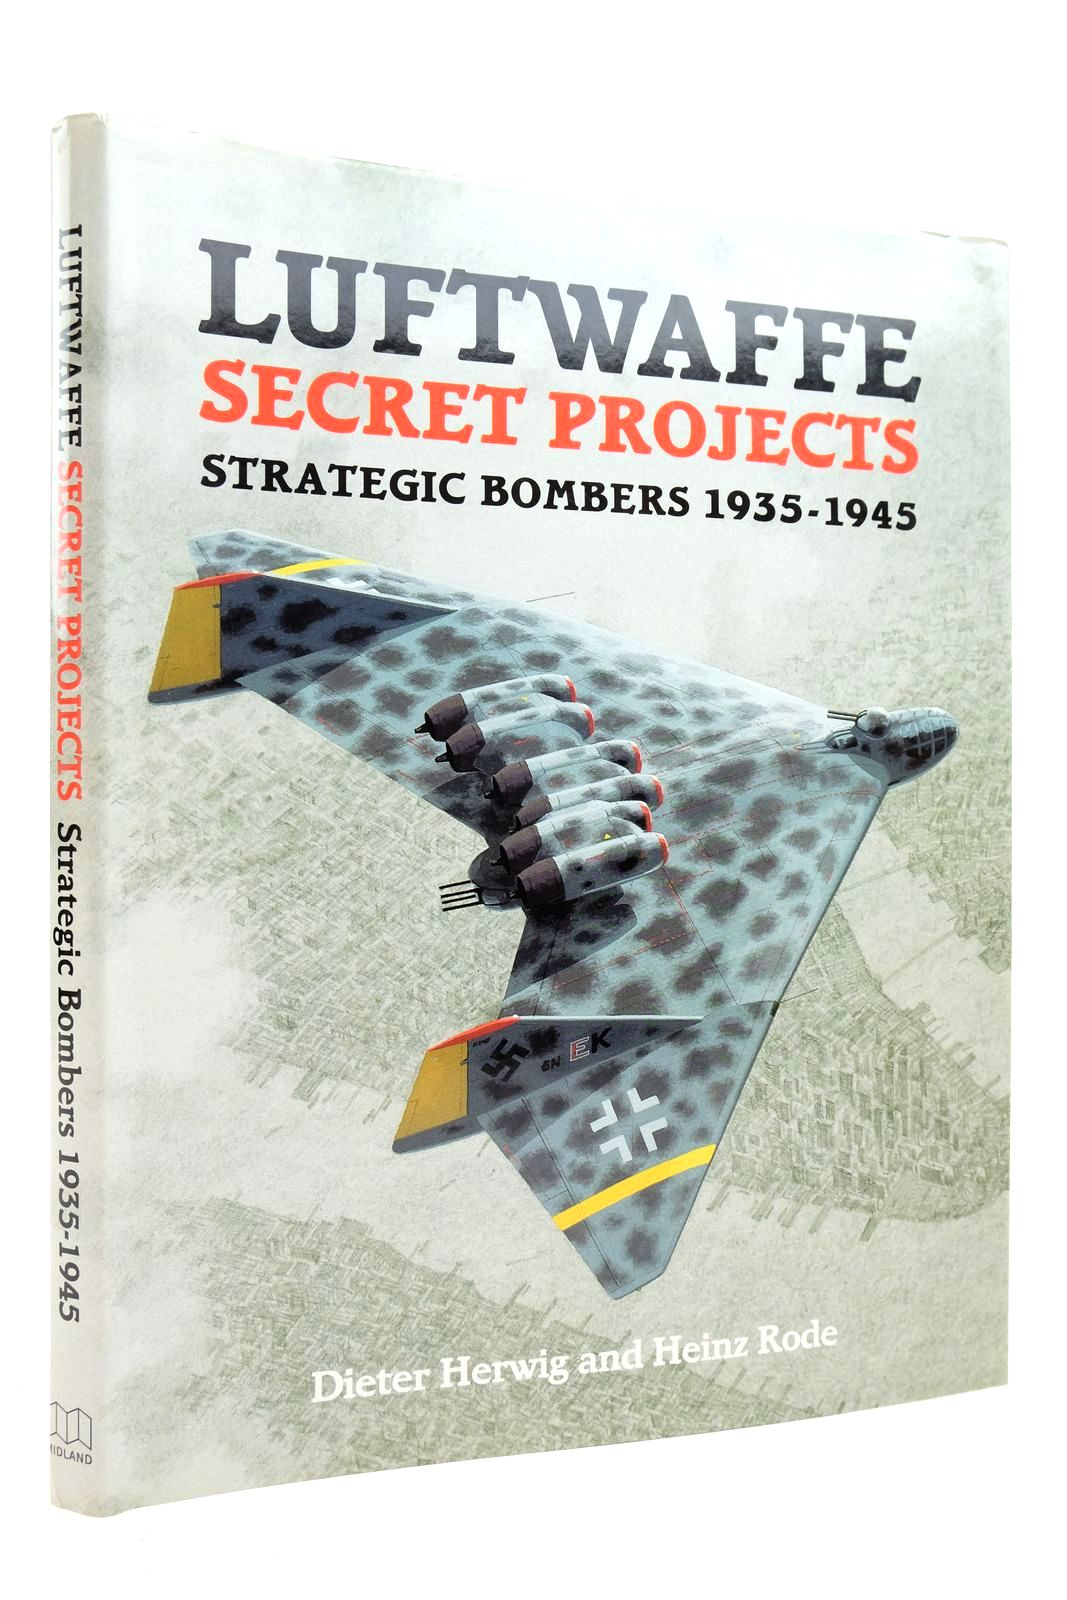 Photo of LUFTWAFFE SECRET PROJECTS STRATEGIC BOMBERS 1935-1945 written by Herwig, Dieter Rode, Heinz published by Midland Publishing (STOCK CODE: 2139371)  for sale by Stella & Rose's Books